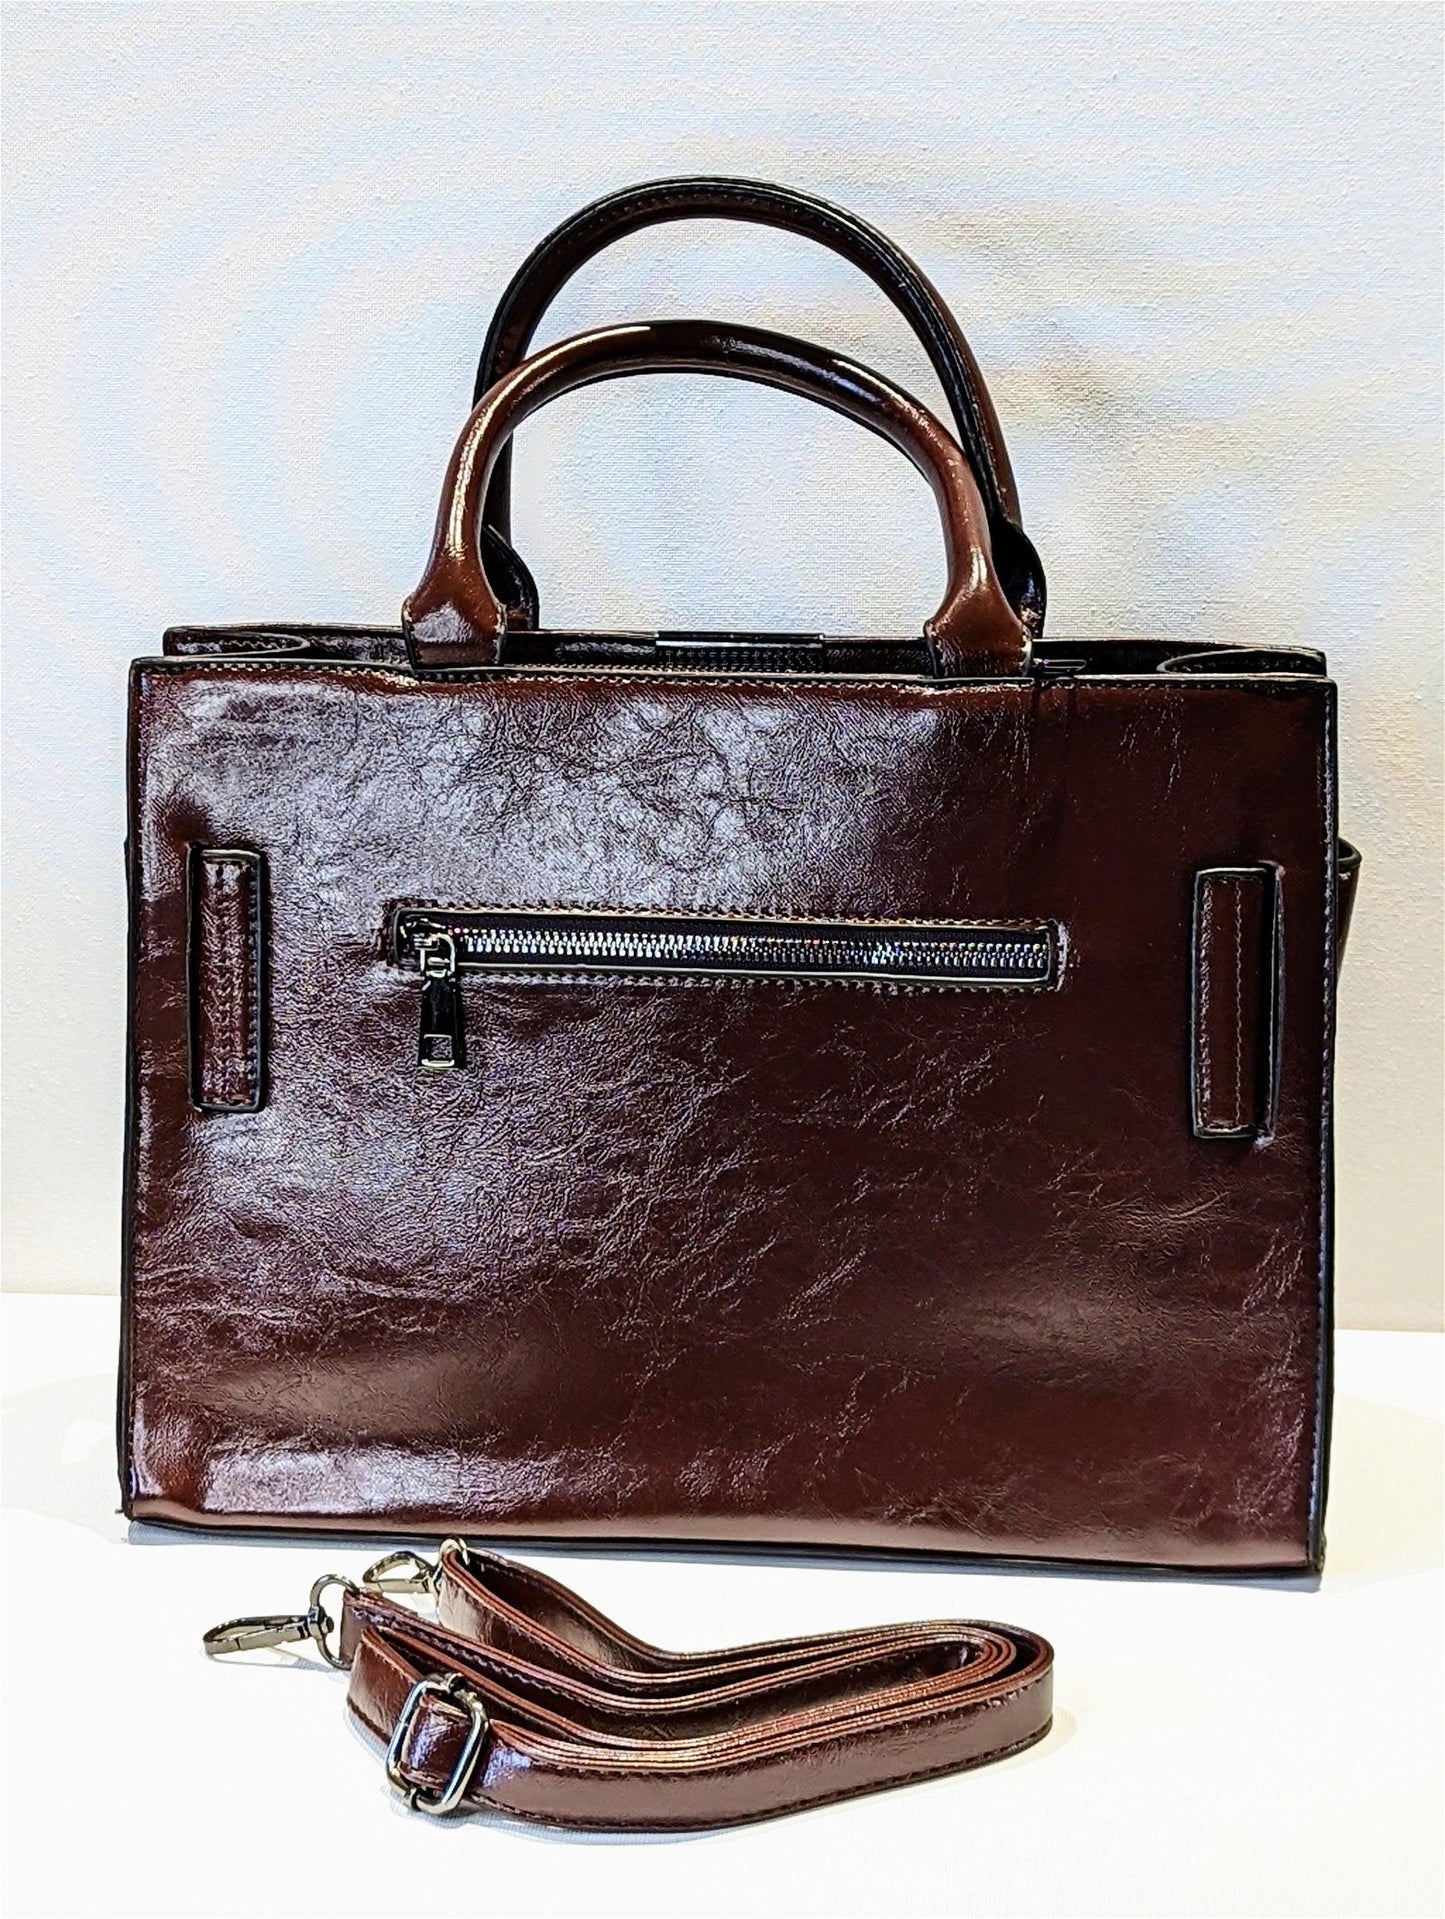 The Belt Bag - Maily's Classic Accessories